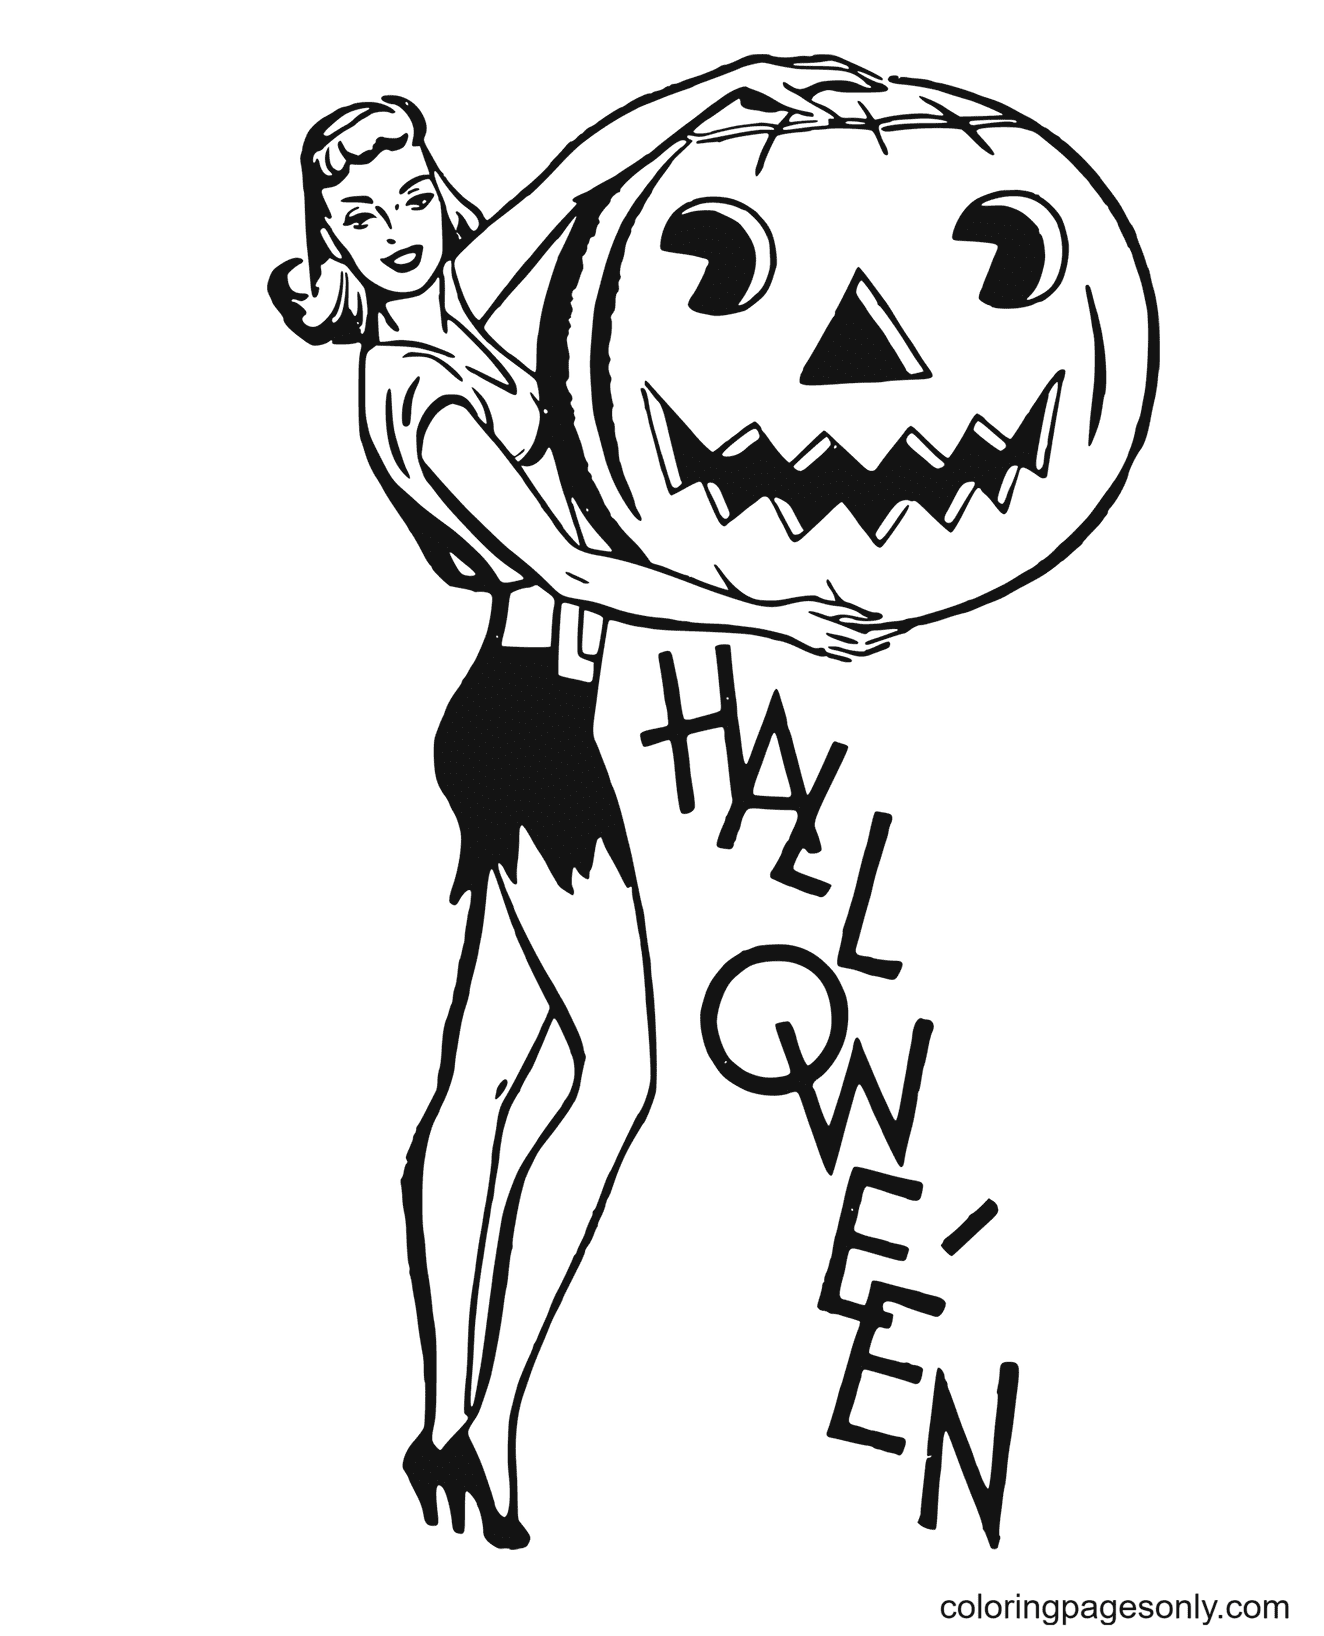 Lady with Jack-o-lantern Coloring Page